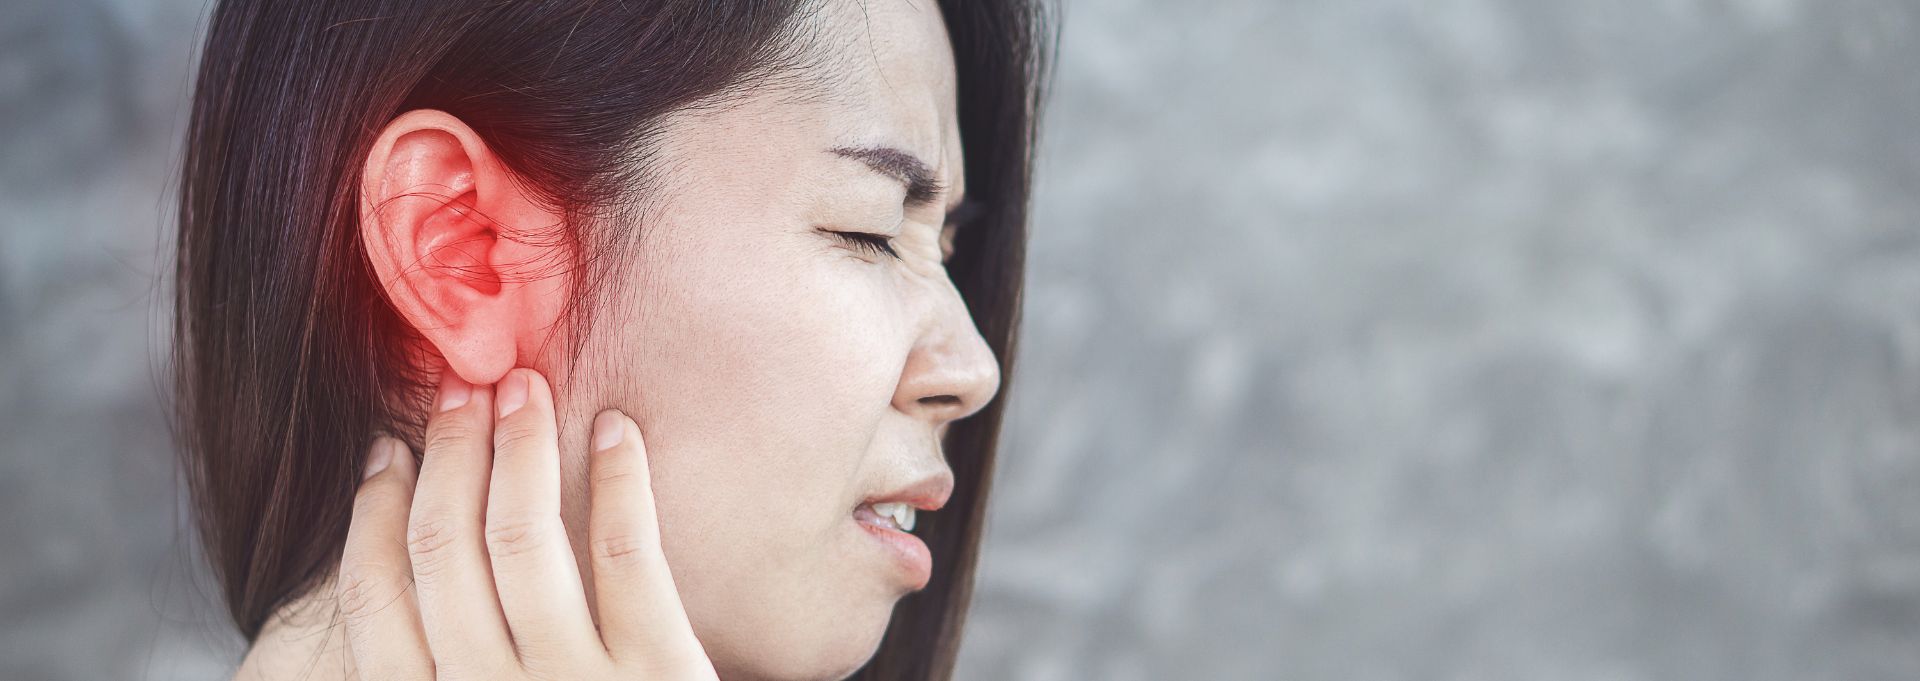 Earwax Removal: Say Goodbye to Ear Pain